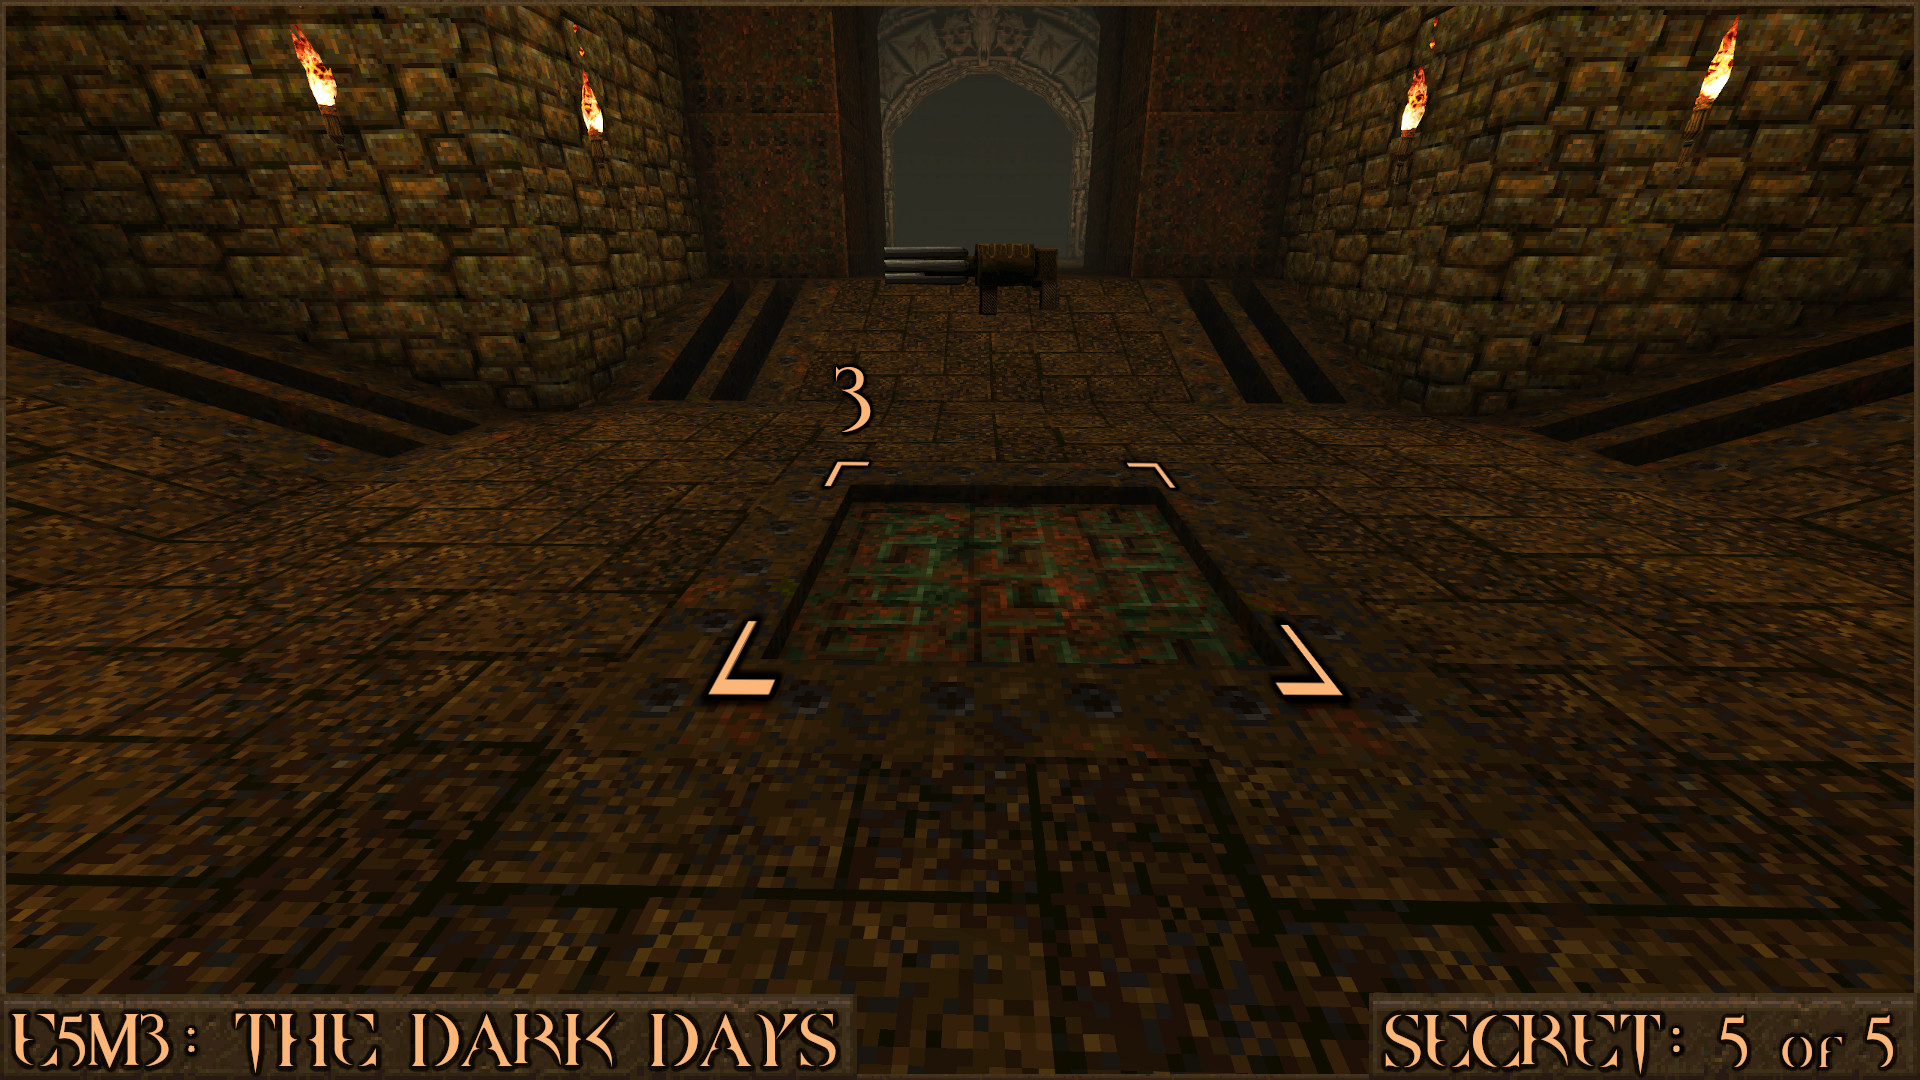 Quake Finding All Secrets in Quake Expansion pack: Dimension of the Past - E5M3: The Dark Days - 3814EA8